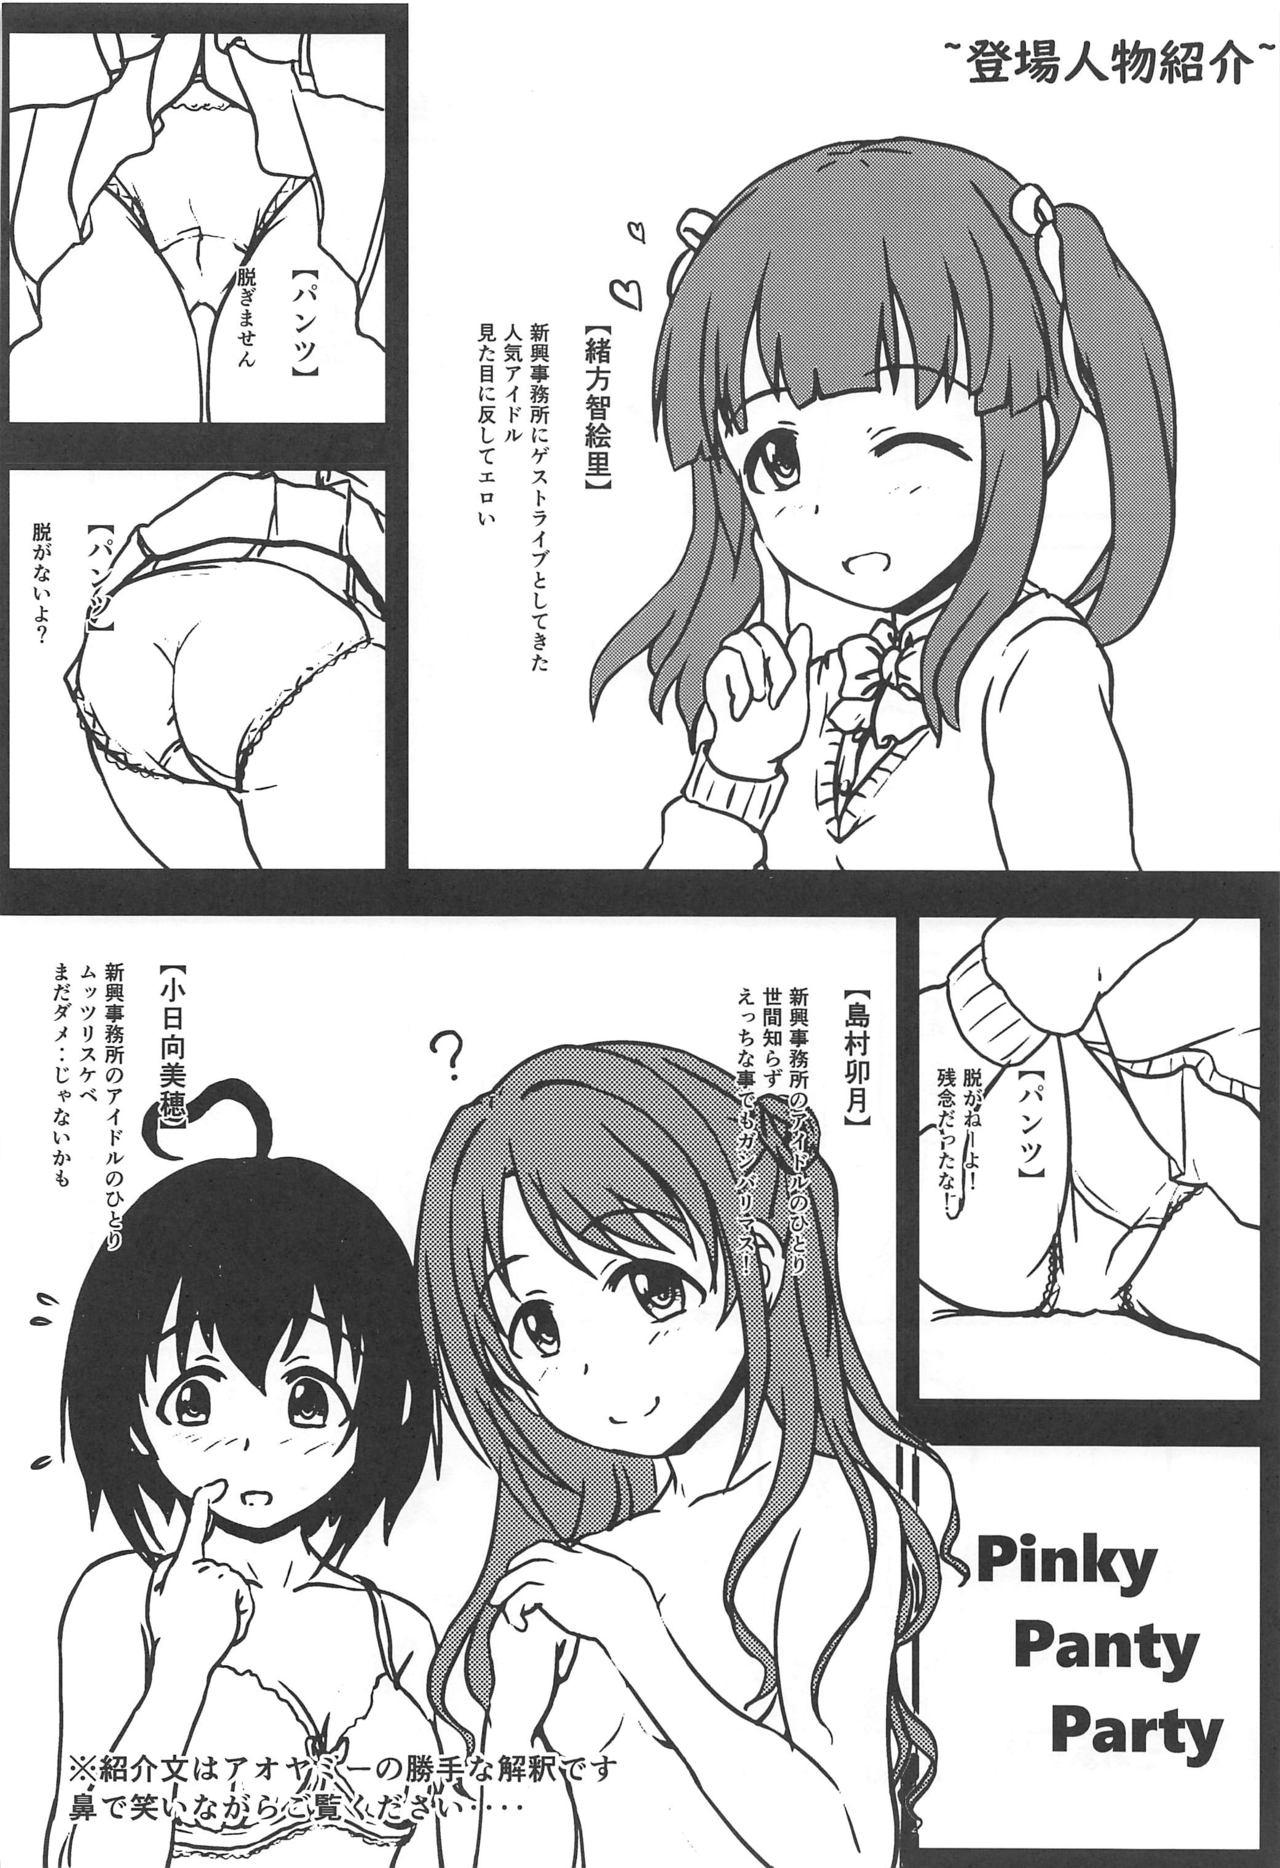 Scissoring Pinky Panty Party - The idolmaster Boss - Page 3